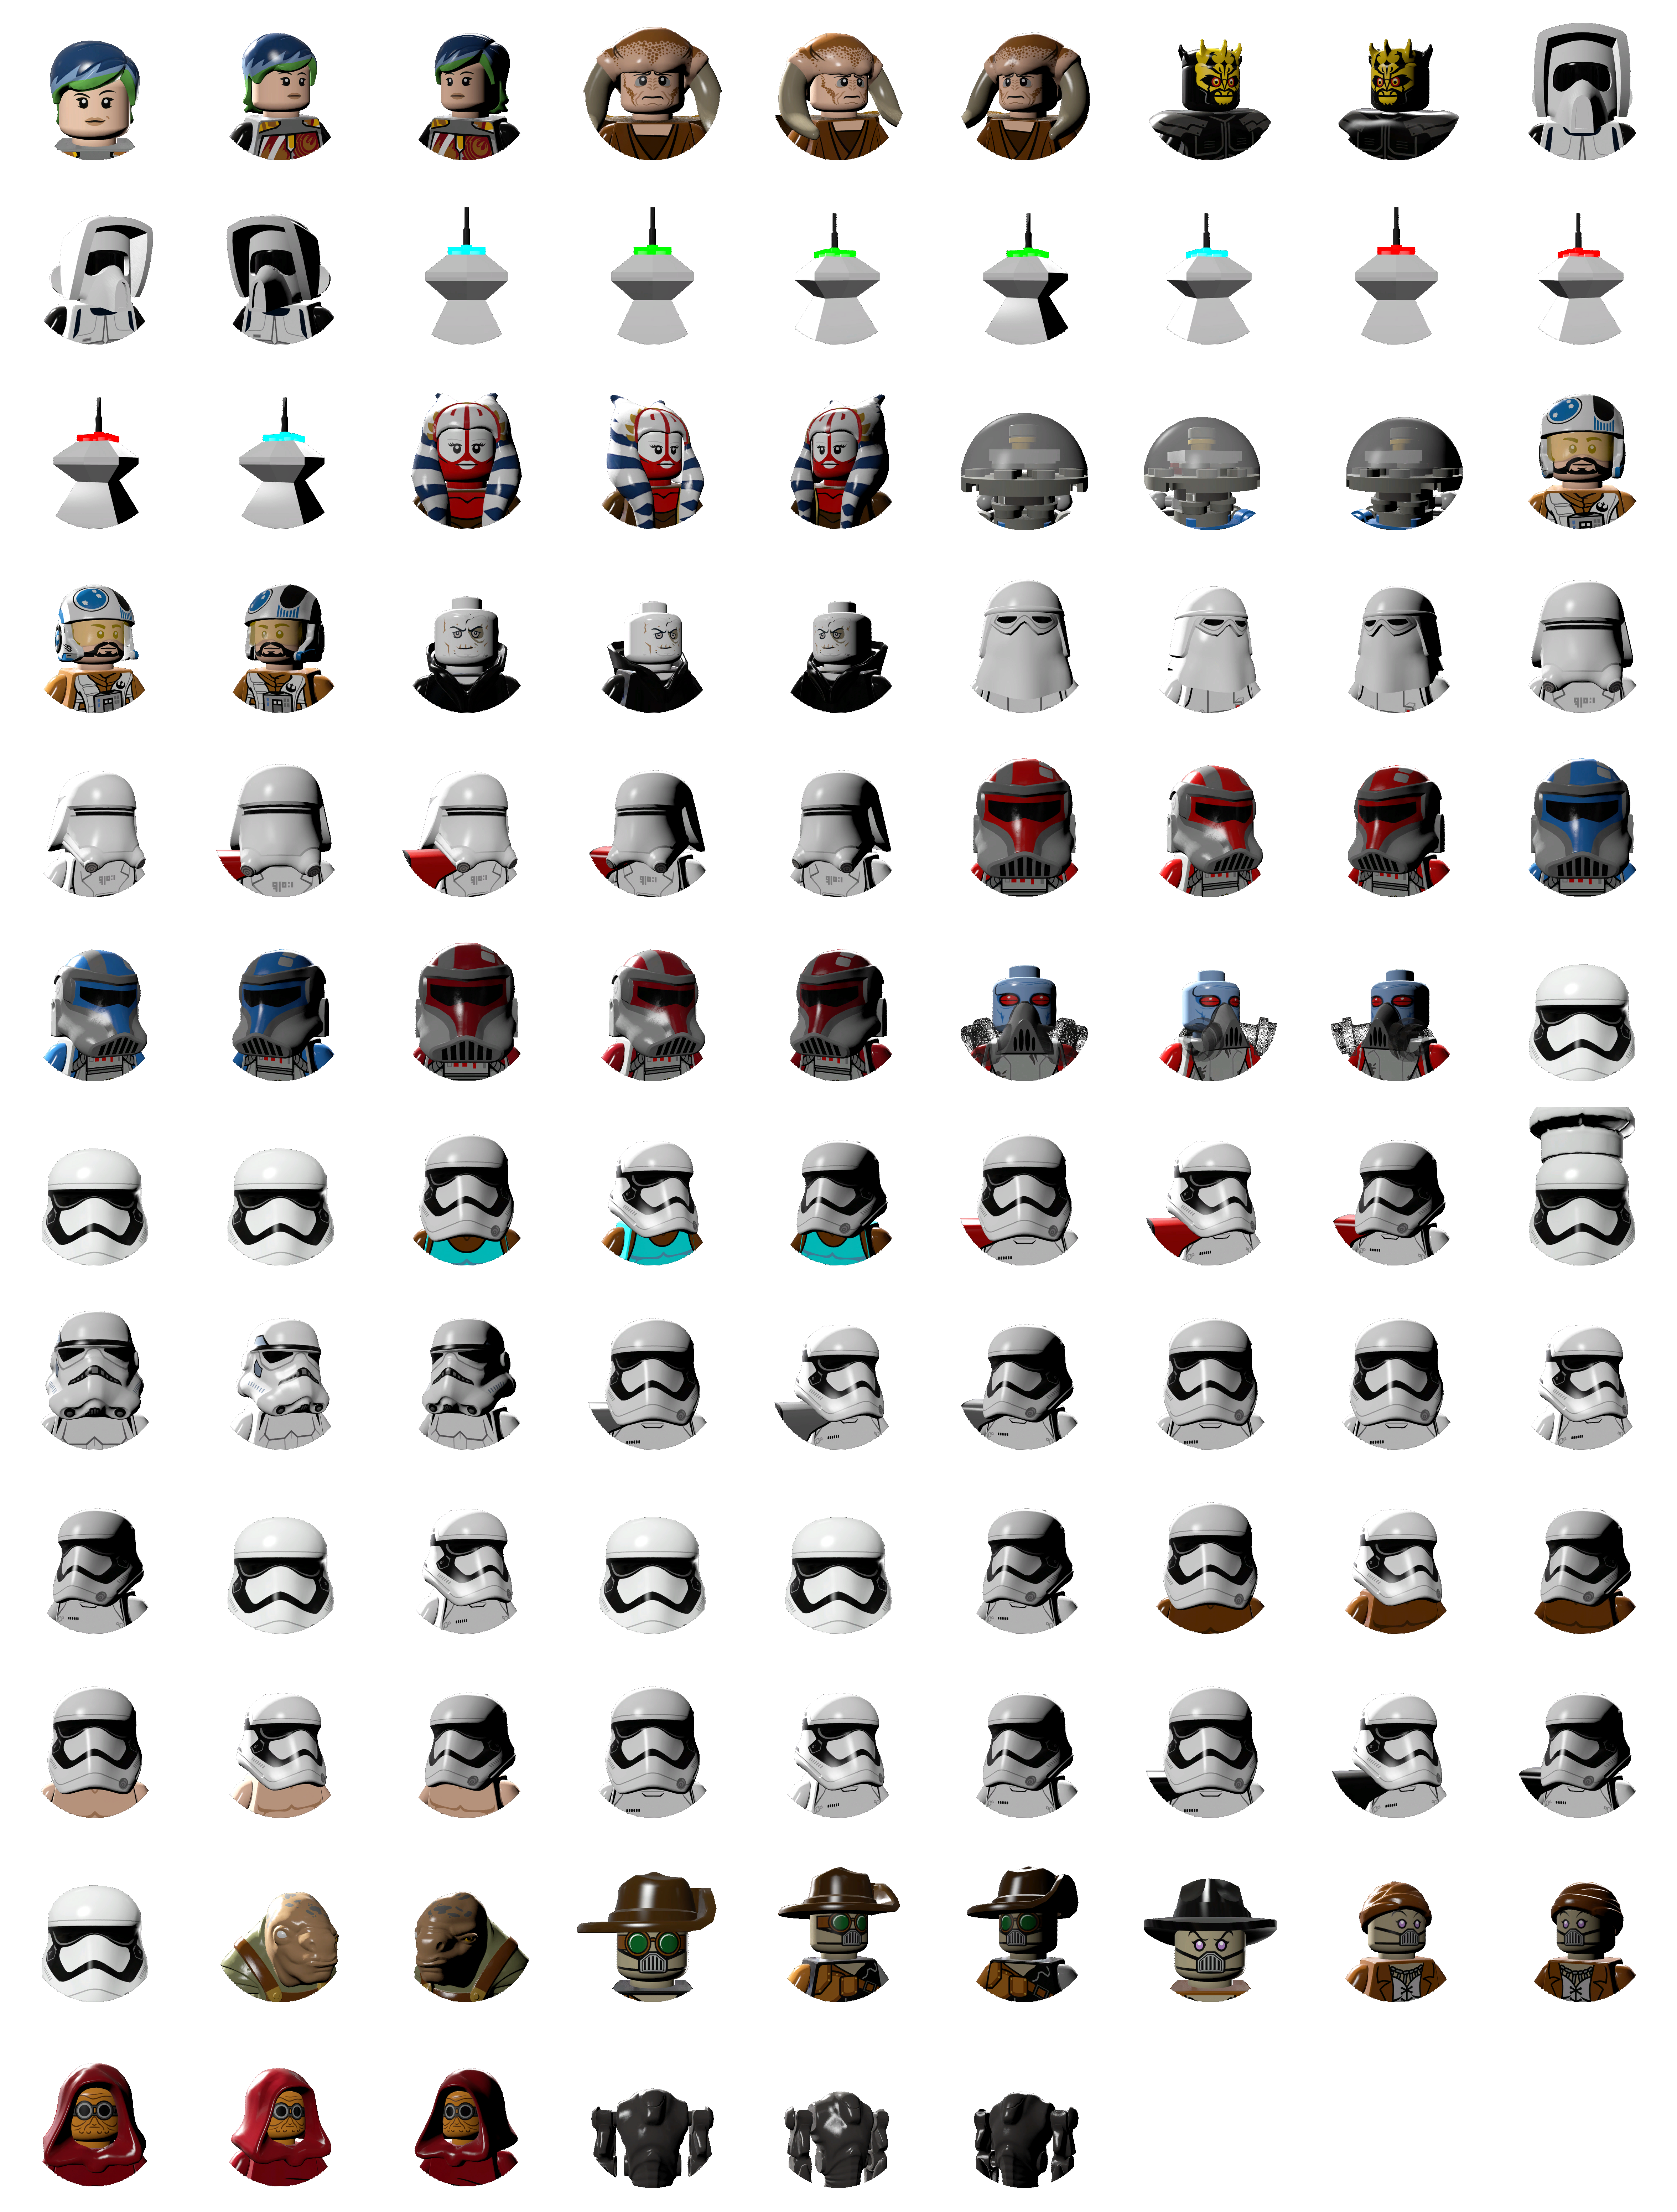 LEGO Star Wars: The Force Awakens - Character Icons (S)